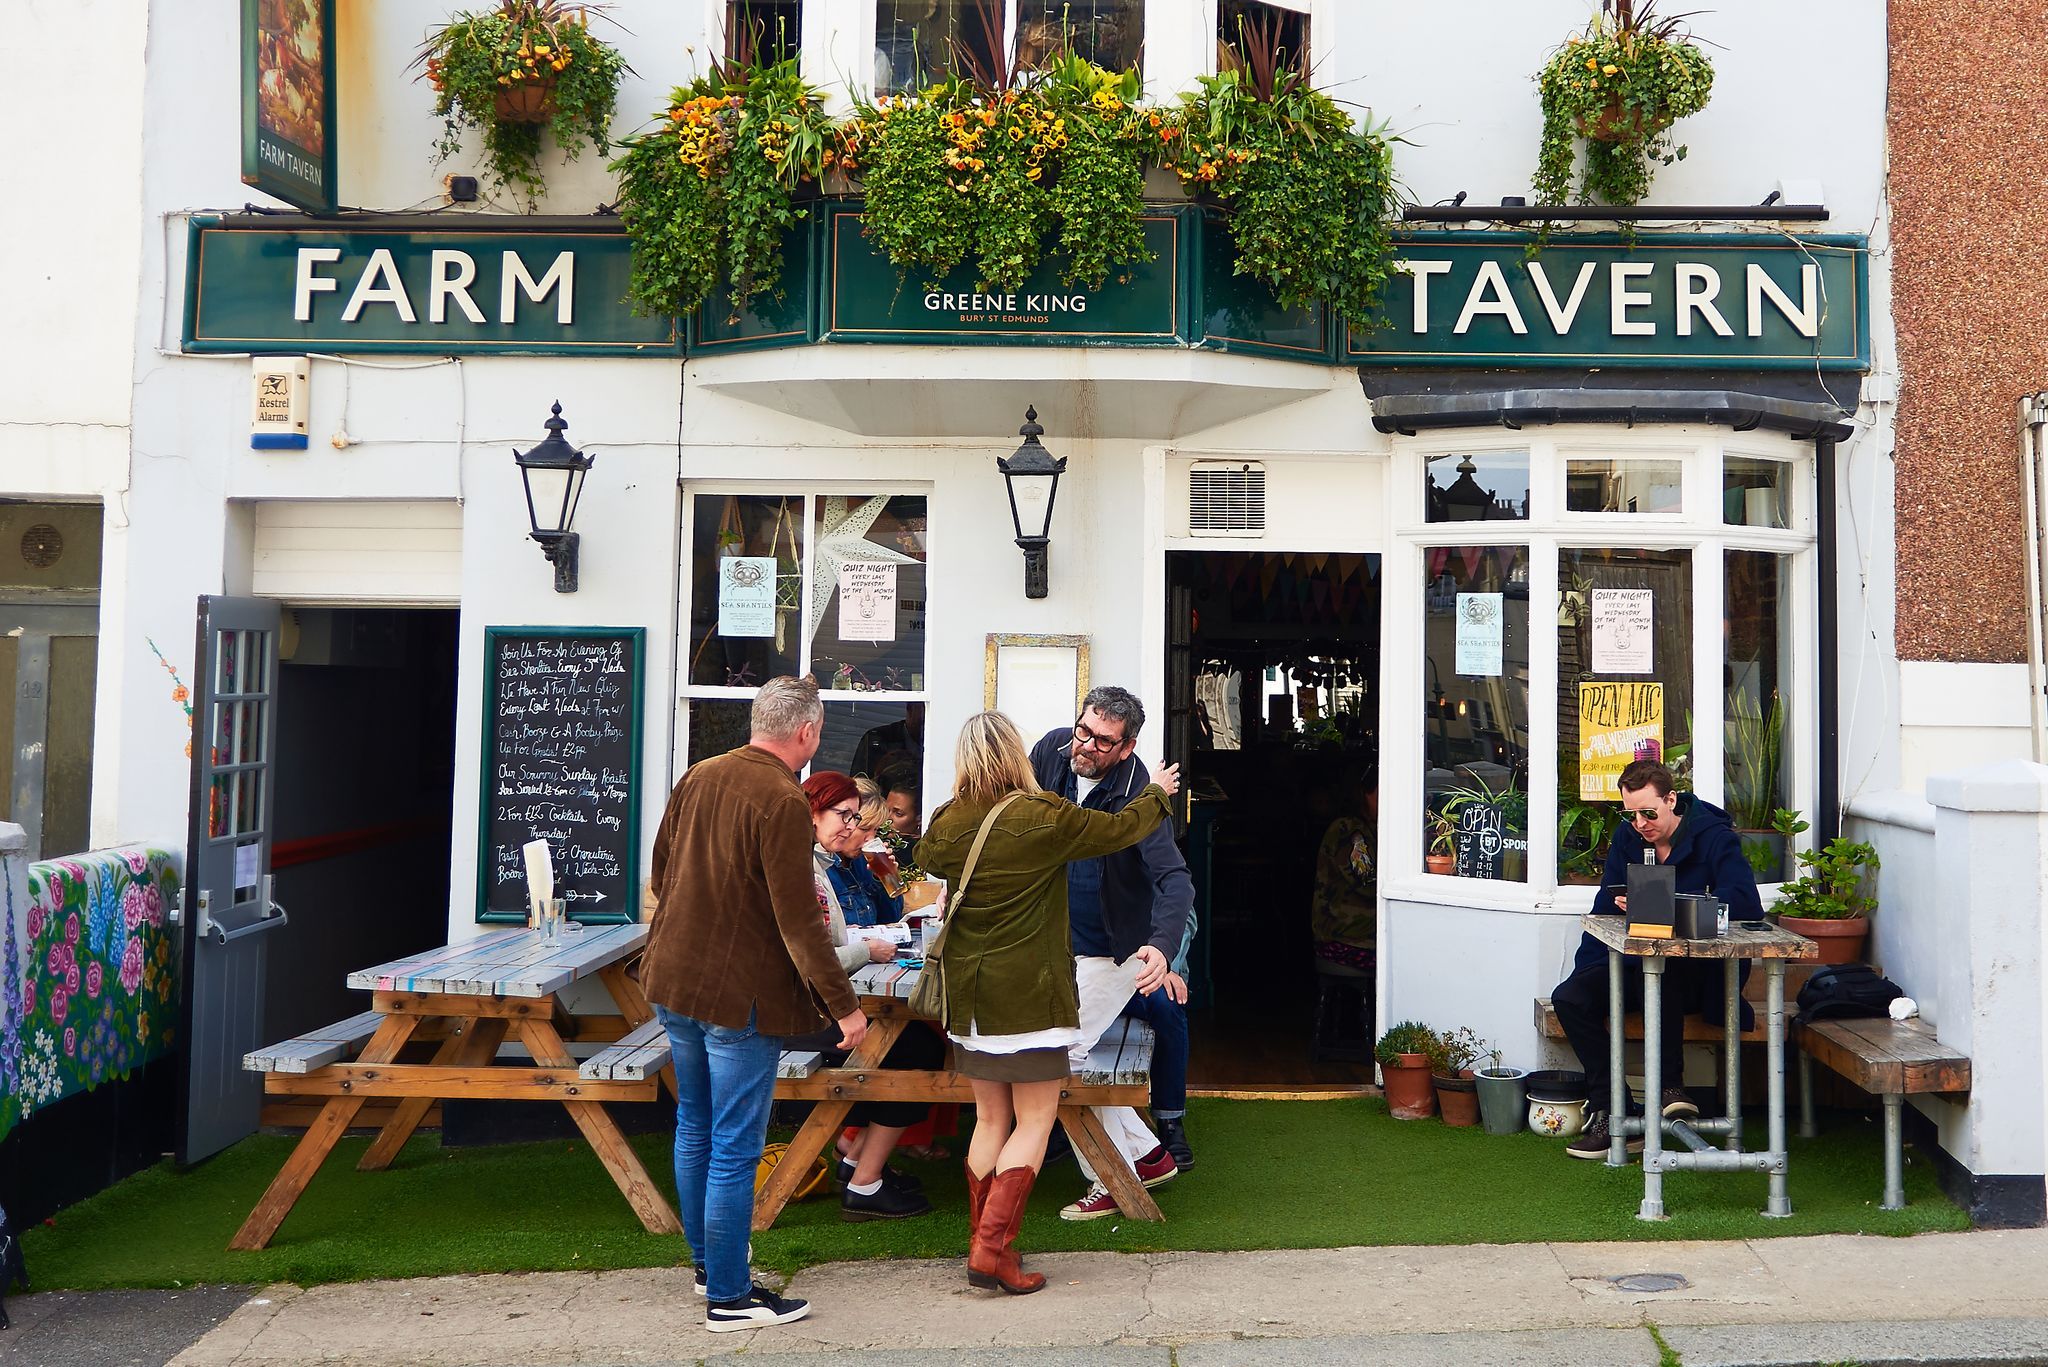 exterior shot of the Farm Tavern in Hove. People greeting each other in front seating area. 